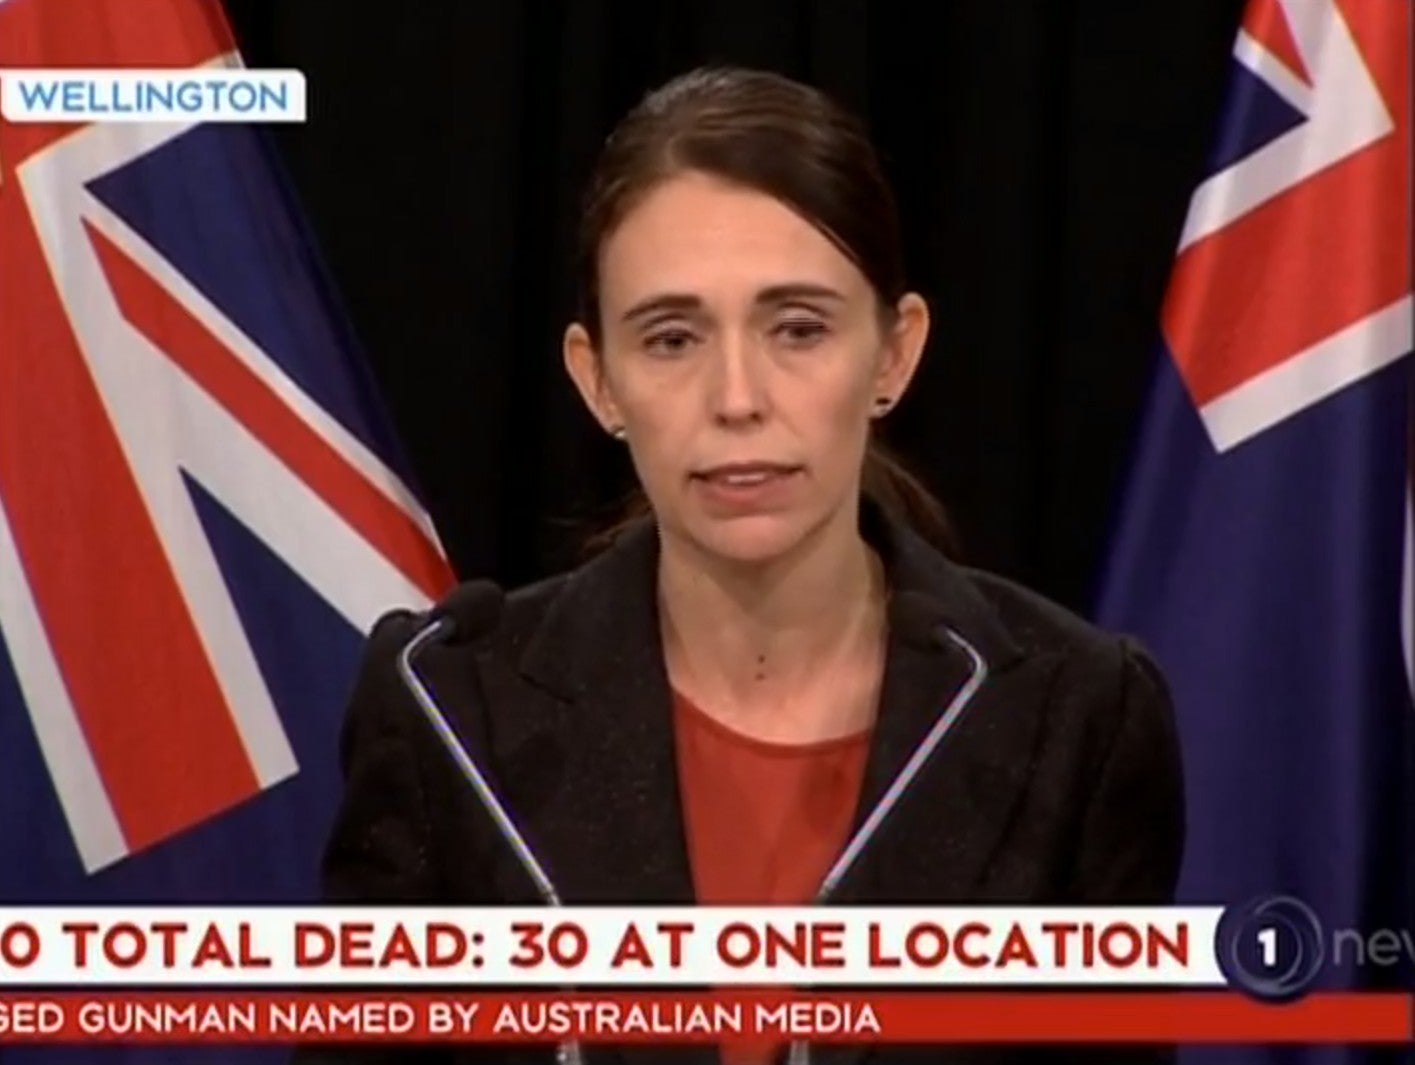 &Quot;This Is One Of New Zealand's Darkest Days&Quot; Nz Pm Condemns Shooting As Terrorist Attack - World Of Buzz